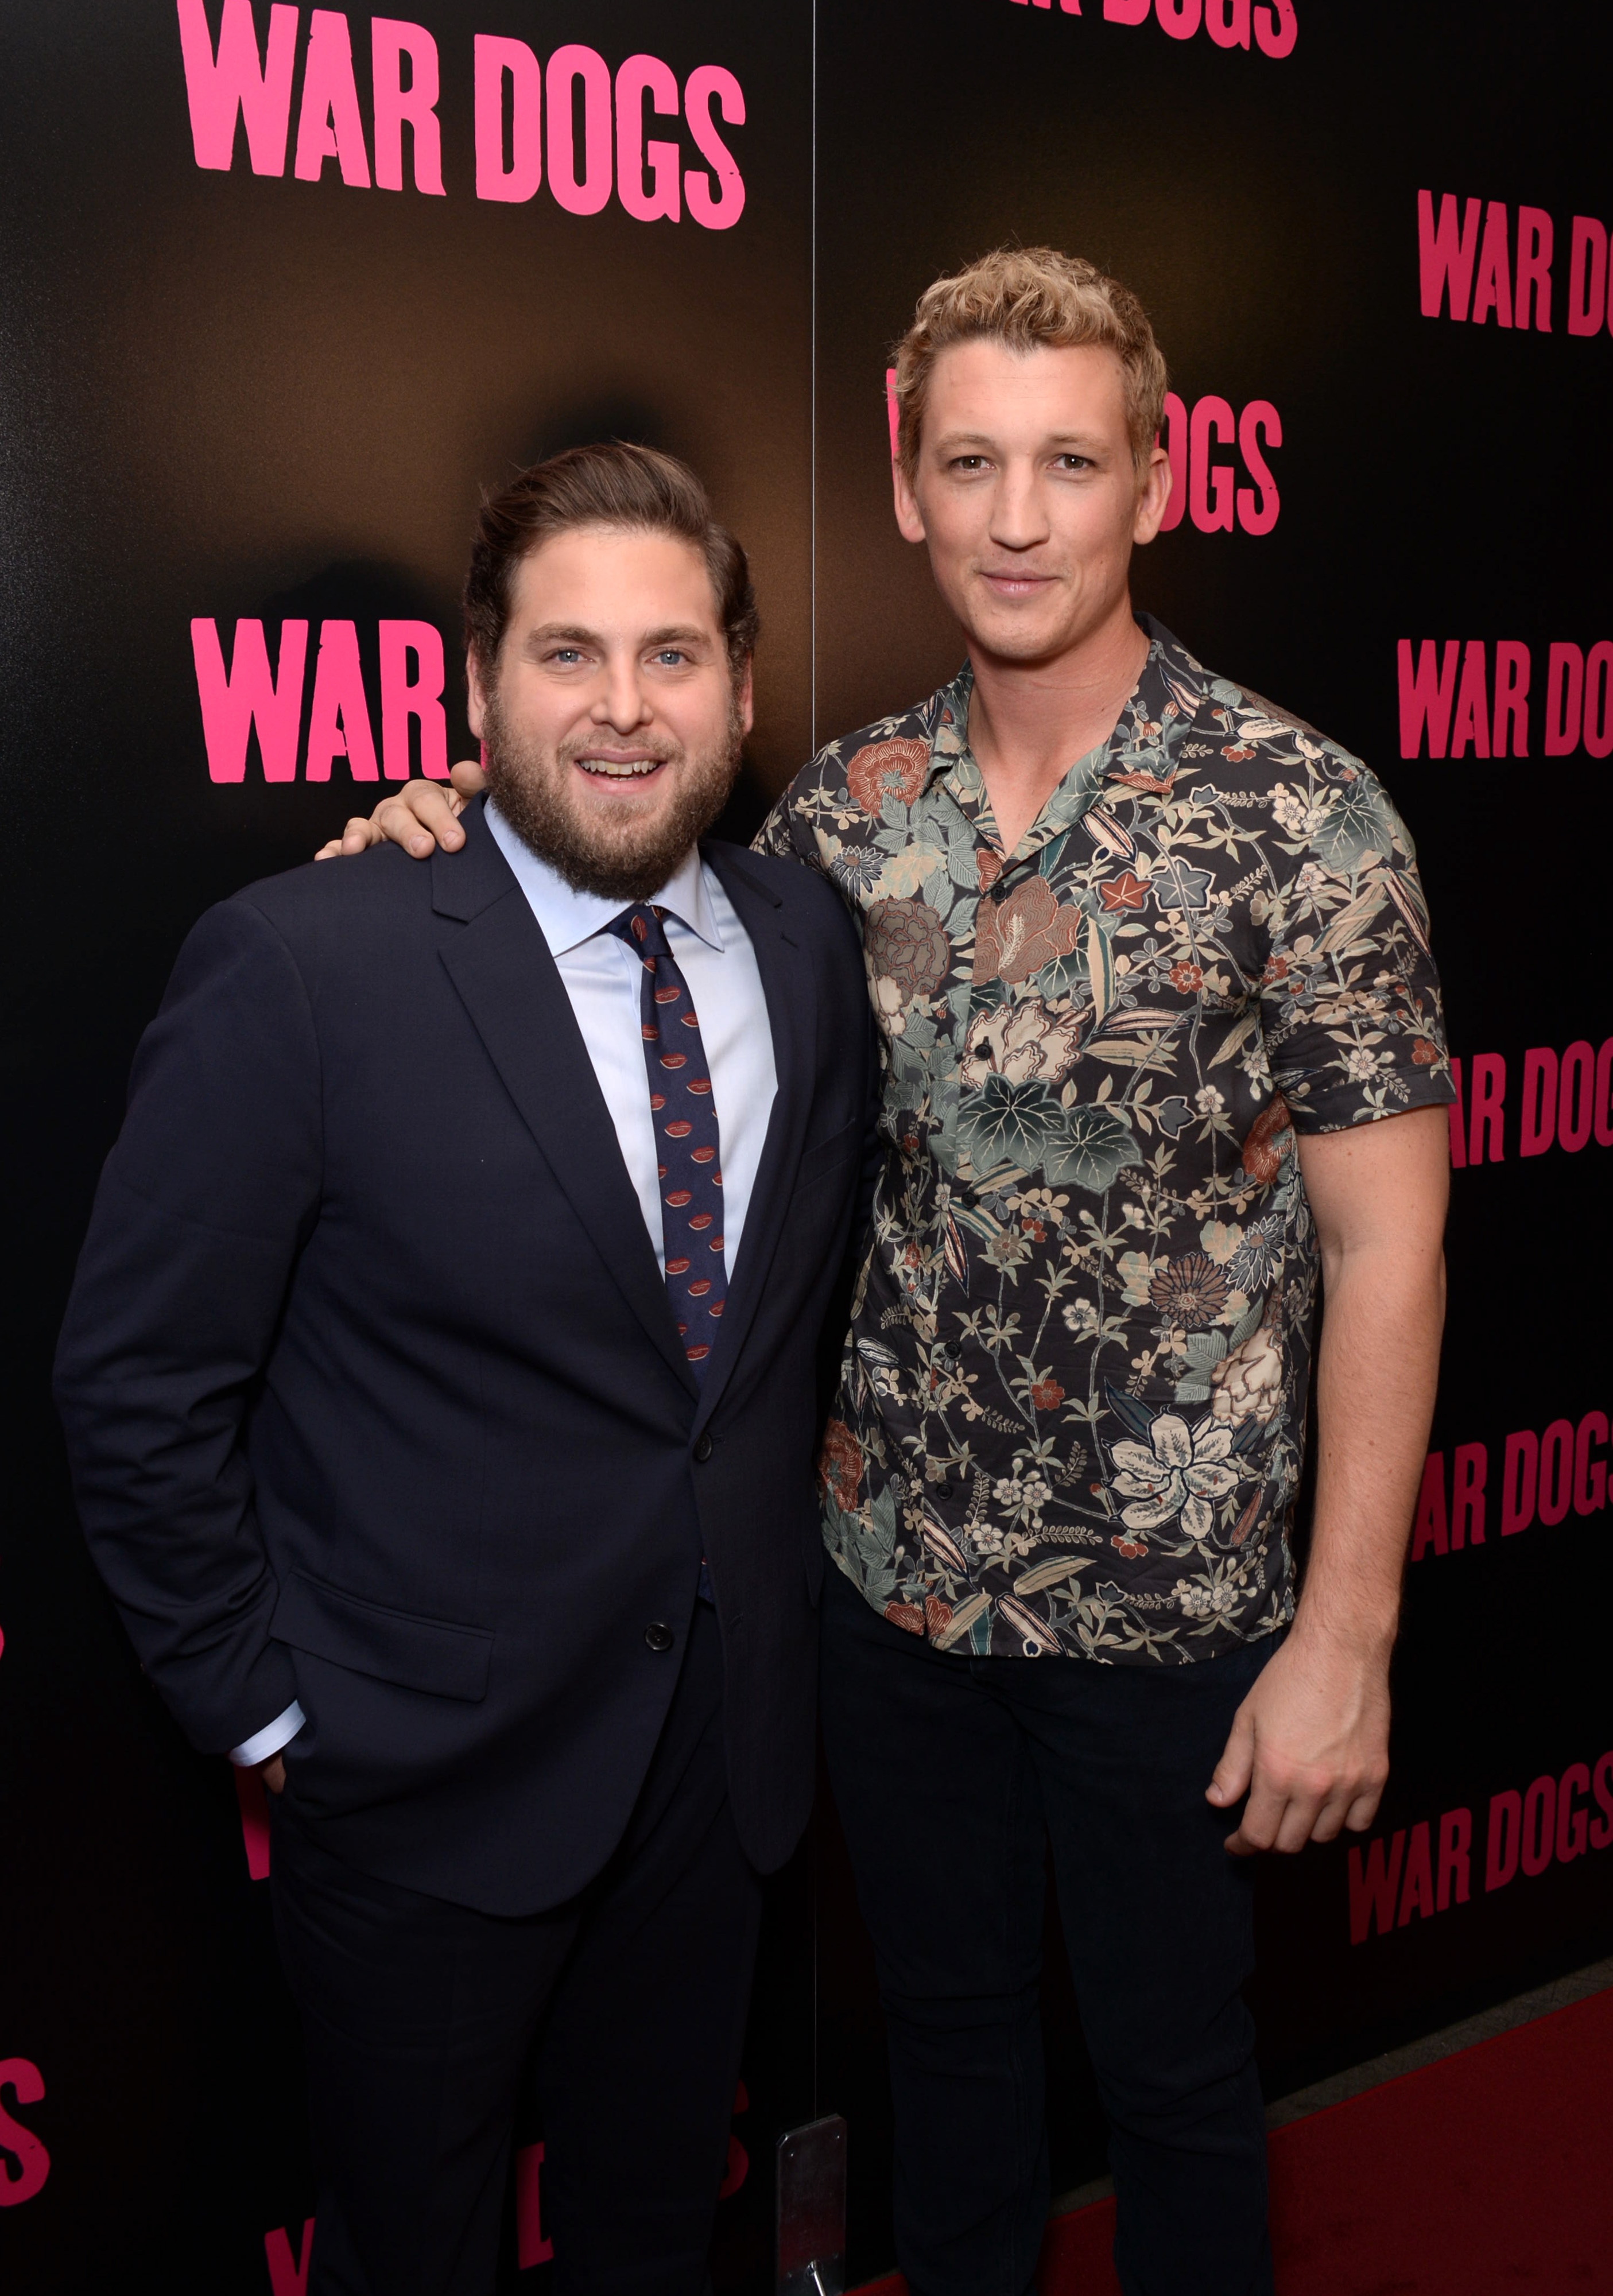 Jonah Hill and Miles Teller attend the "War Dogs" New York premiere on August 3, 2016. (Andrew Toth—FilmMagic/Getty Images)